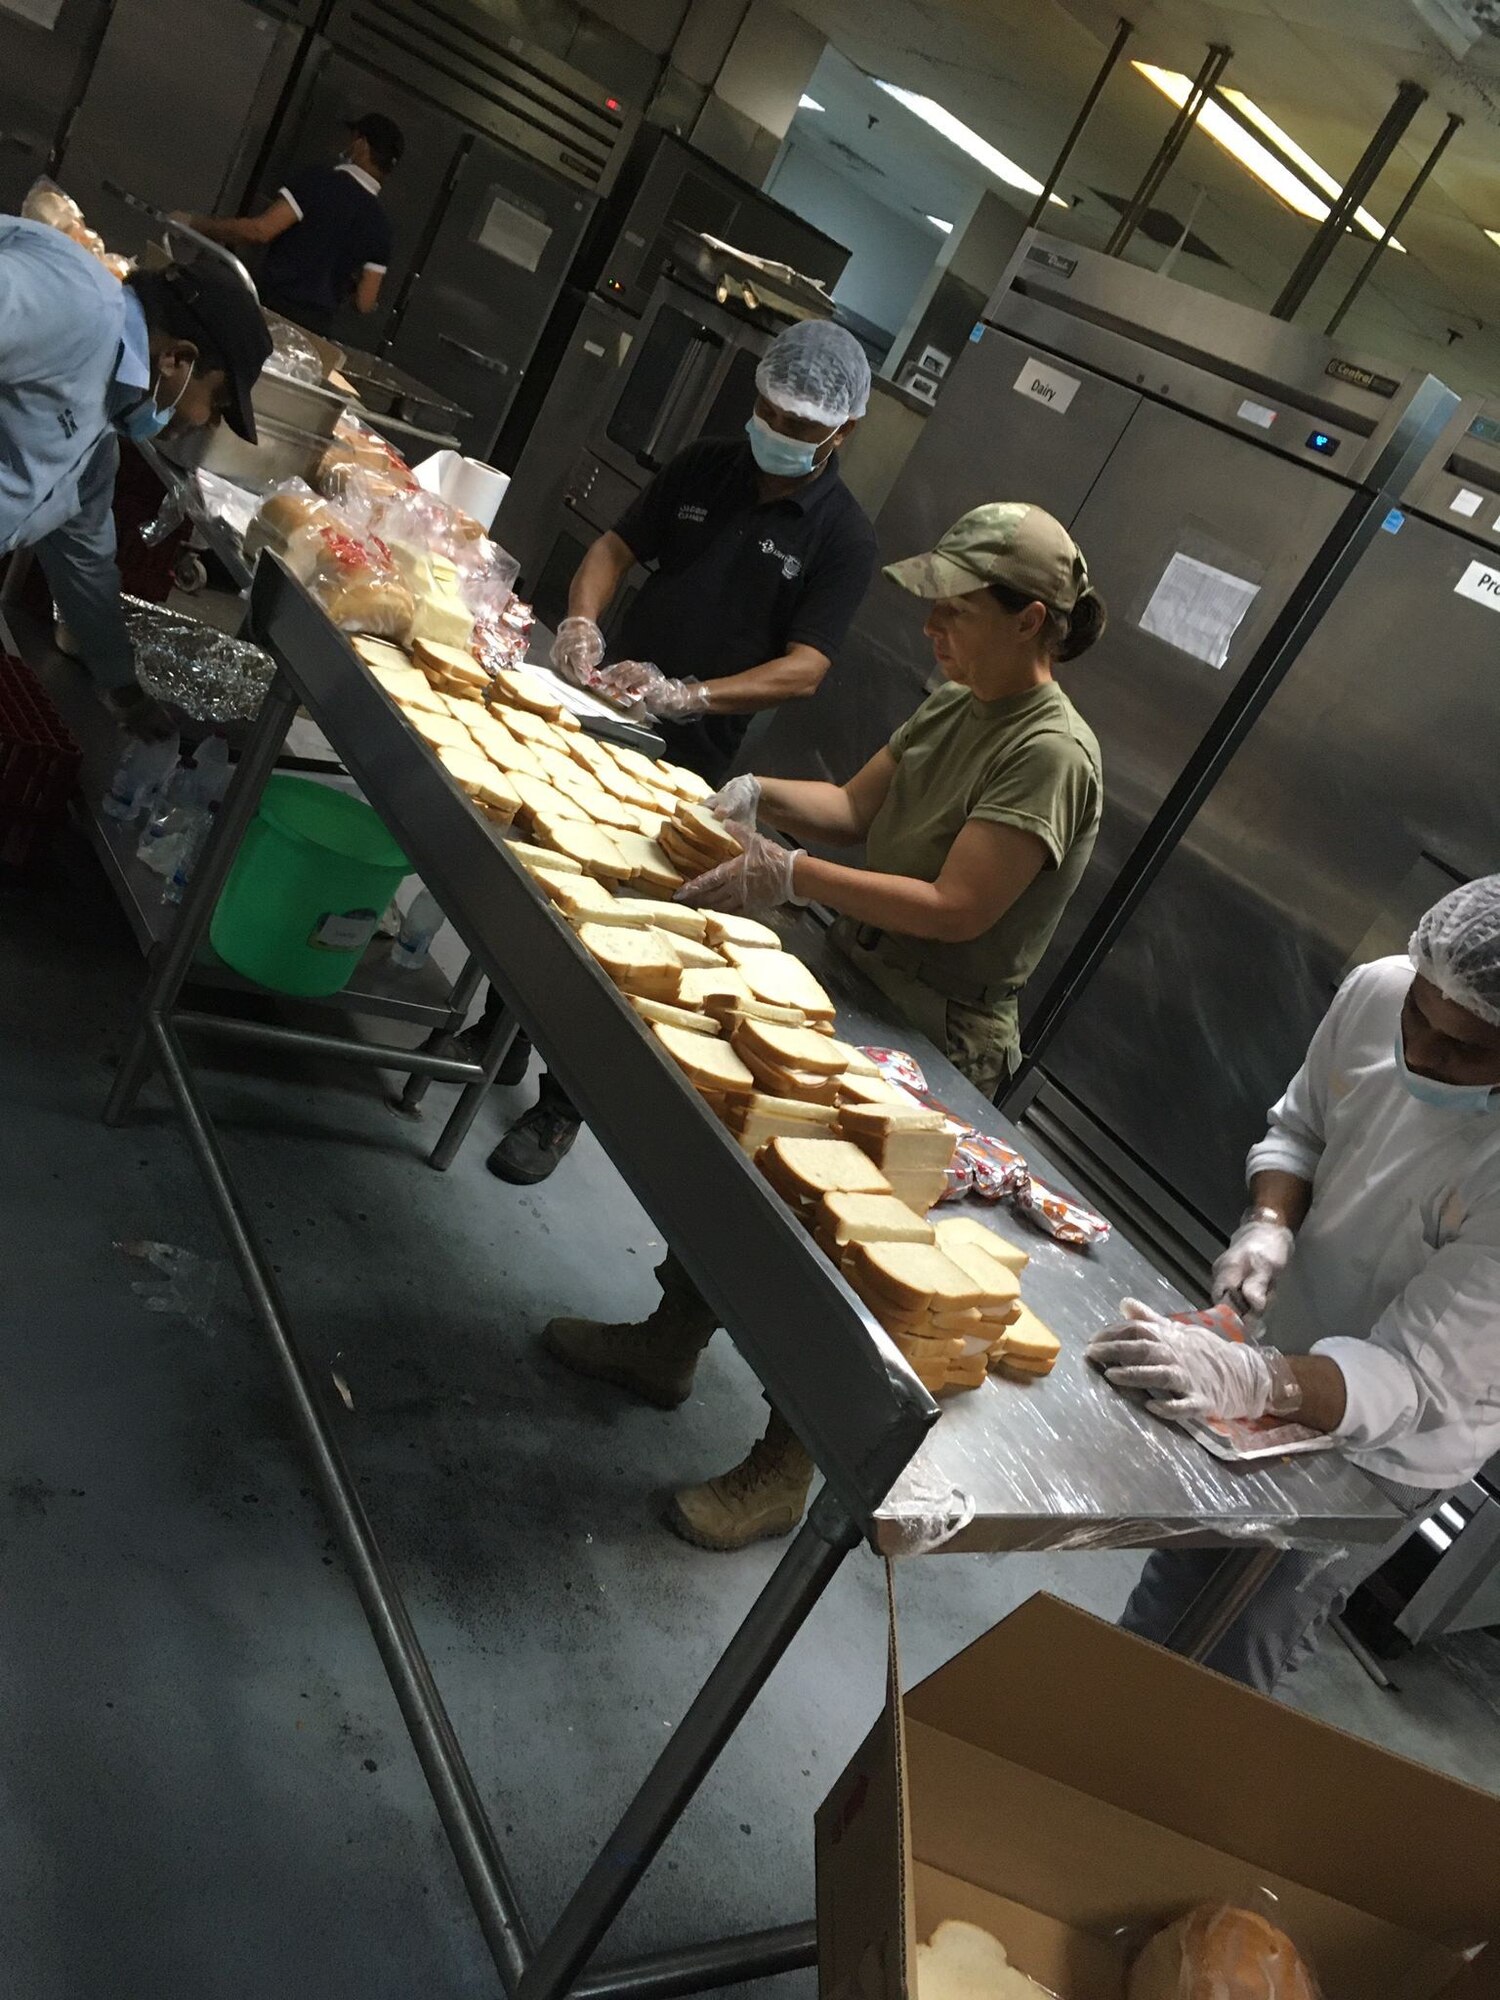 Airmen from the 379th Expeditionary Force Support Squadron and contractors make sandwiches for Afghanistan evacuees in a dining facility at Al Udeid Air Base, Qatar.